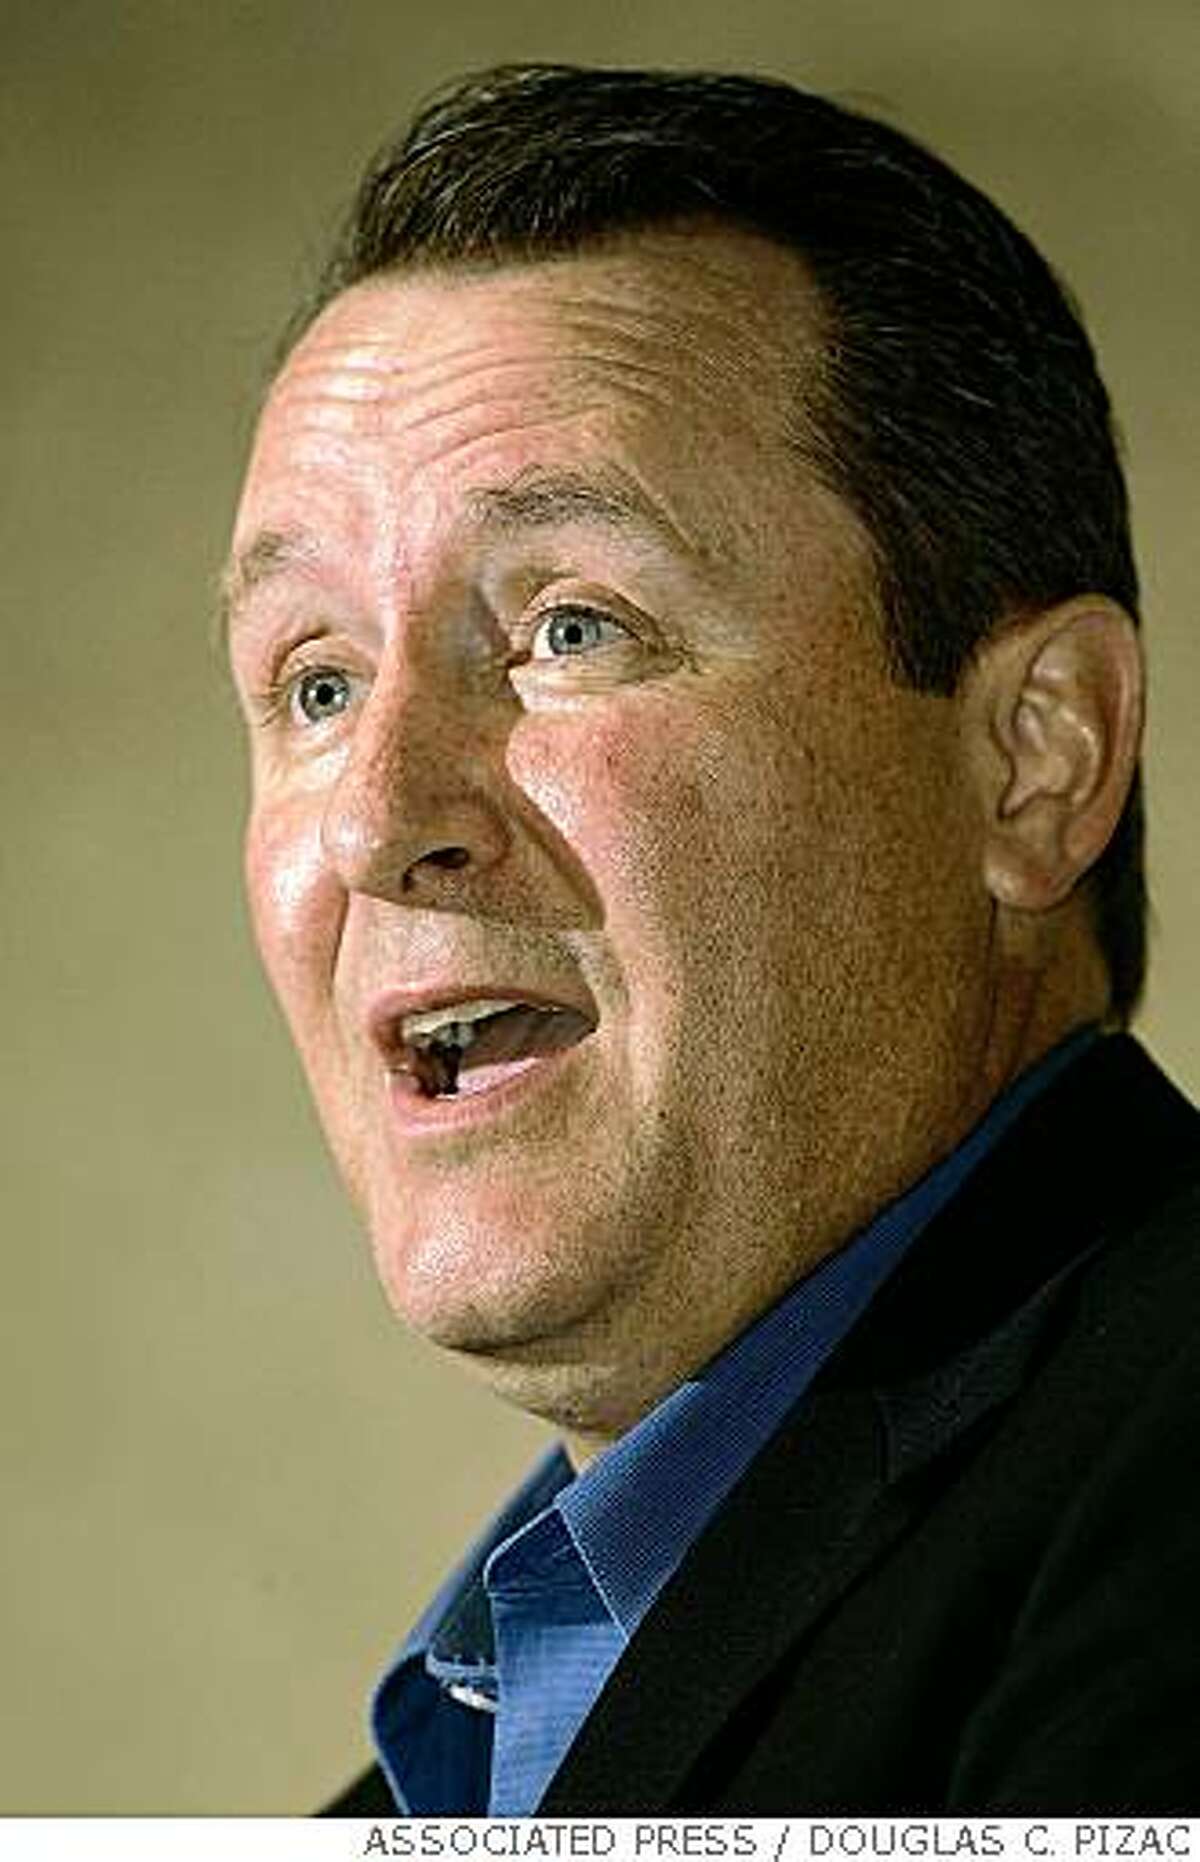 Utah's Attorey General Mark Shurtleff speaks at the annual Utah Public Health conference, Monday, May 9, 2005, in Park City, Utah. Shurtleff addressed the issue of polygamy in the state and what can be done to help those communities. (AP Photo/Douglas C. Pizac)